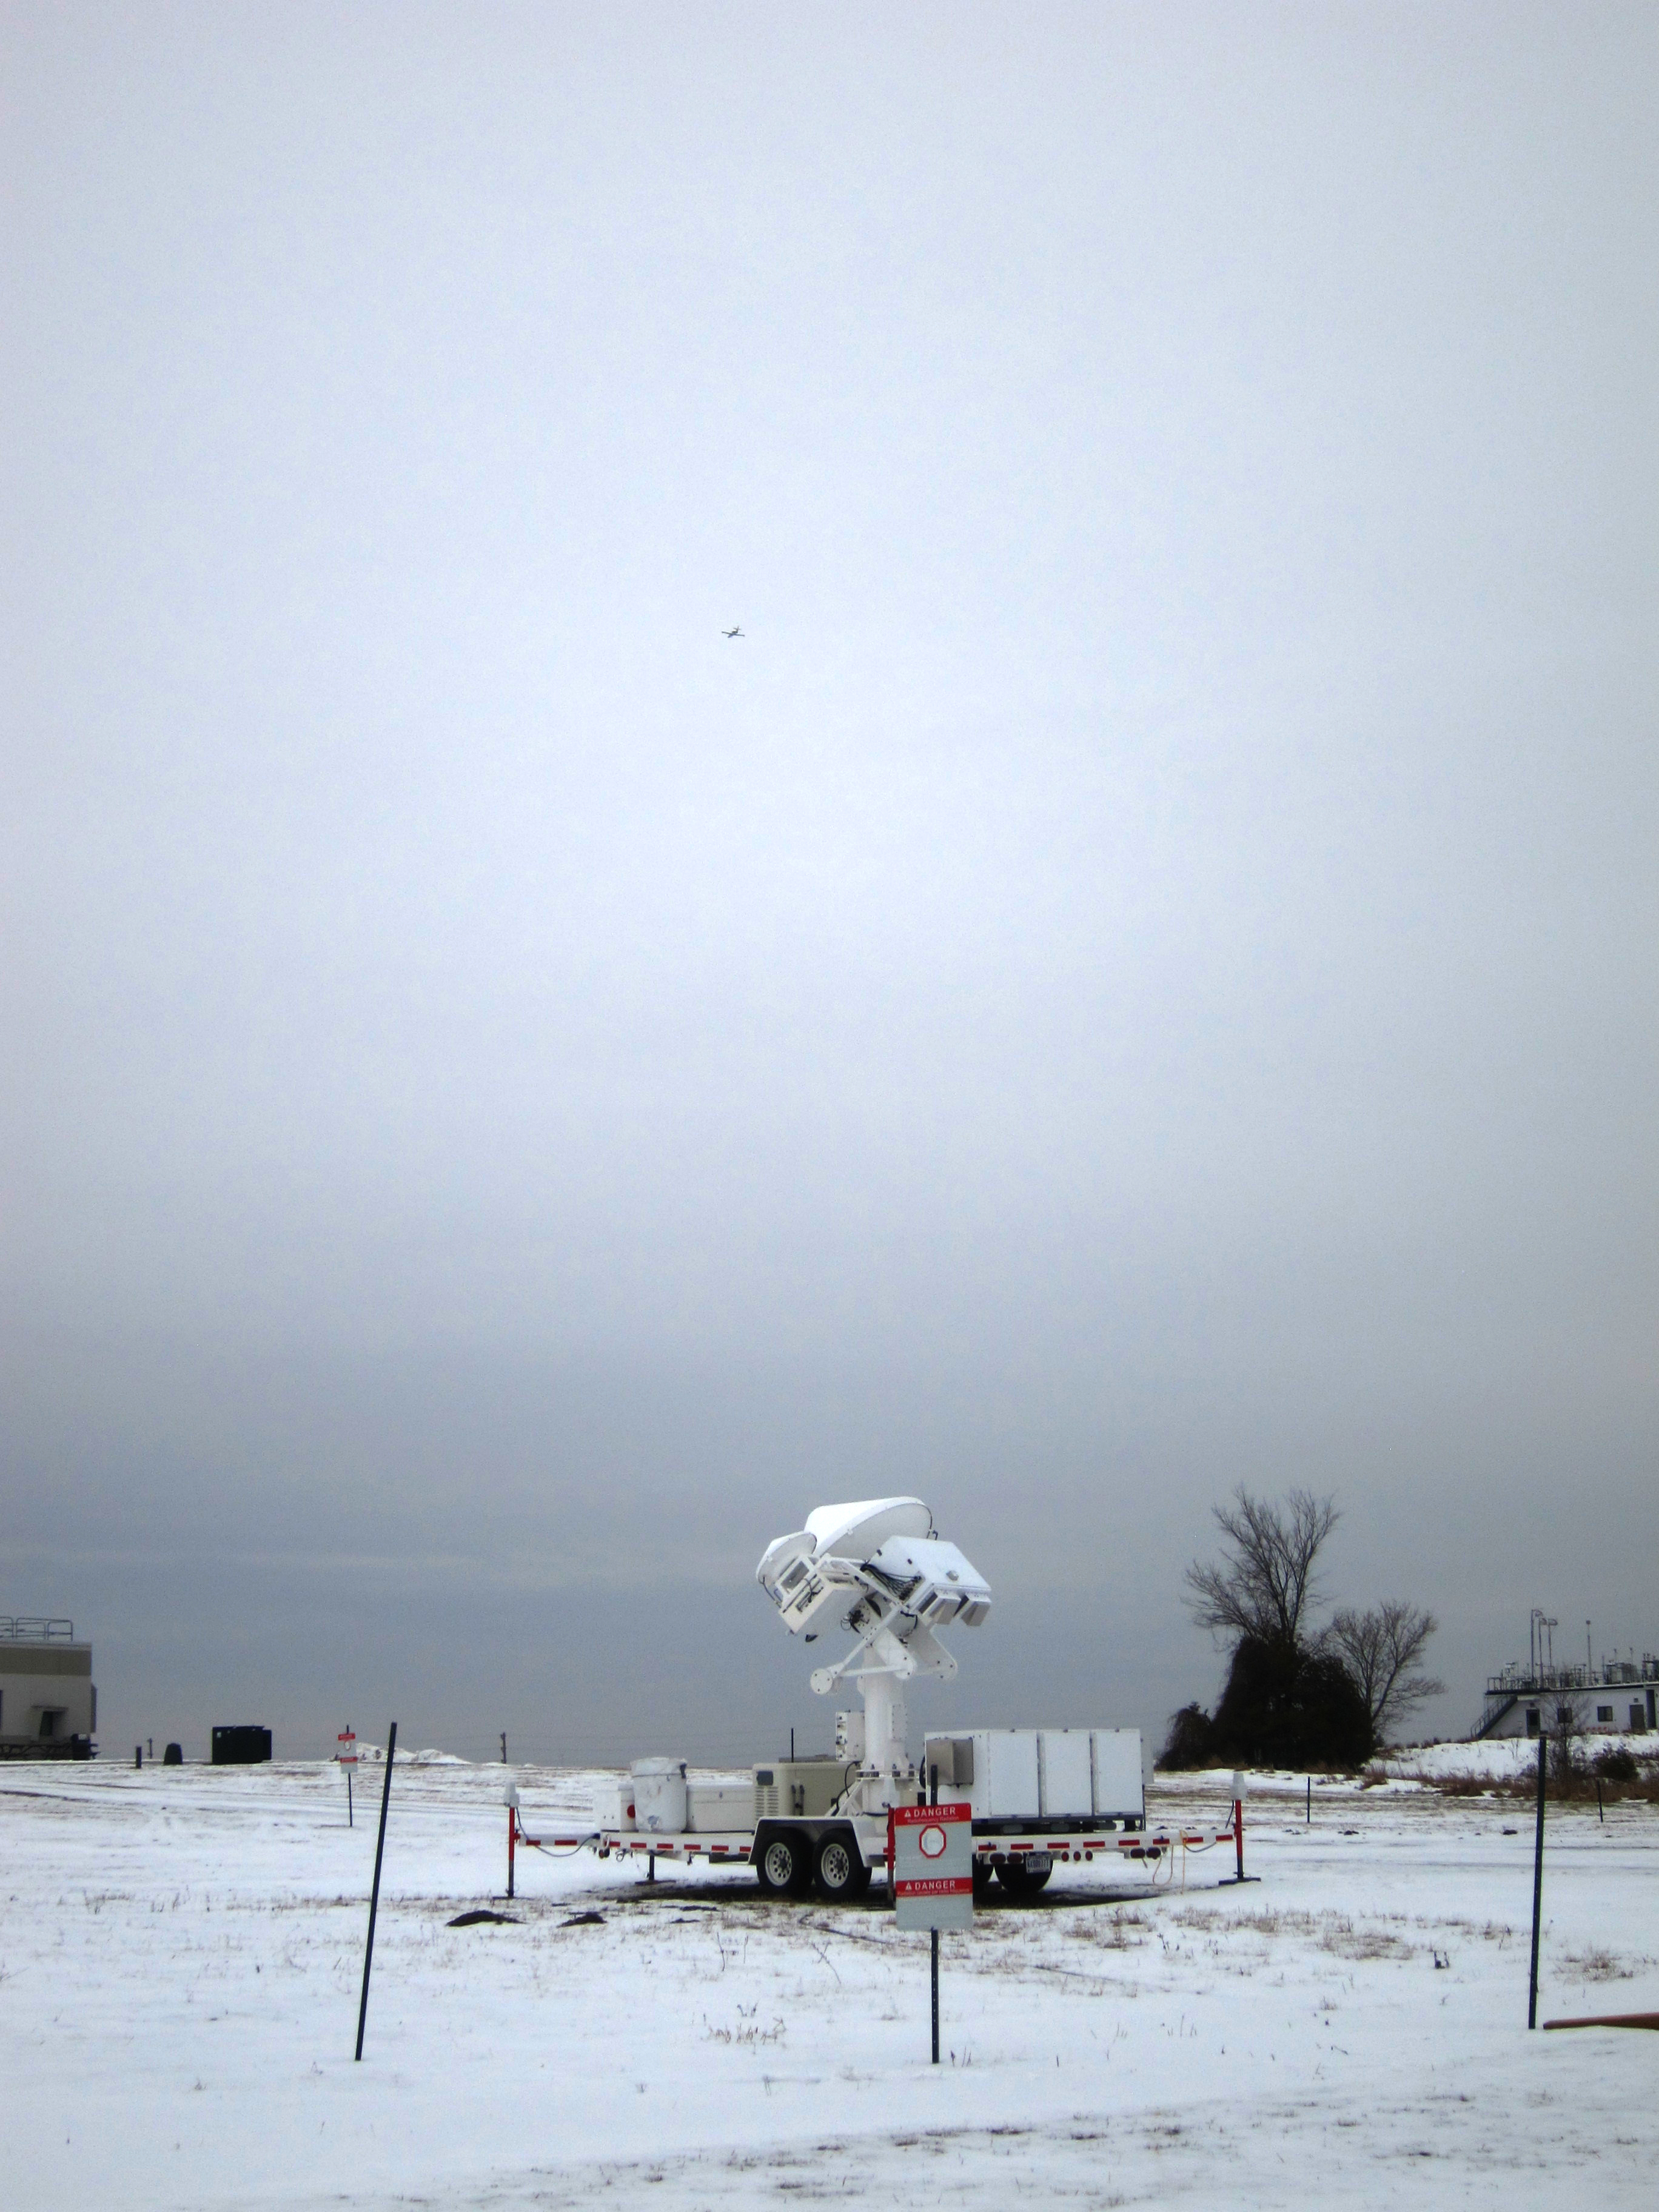 Radar on the ground with Citation in the sky